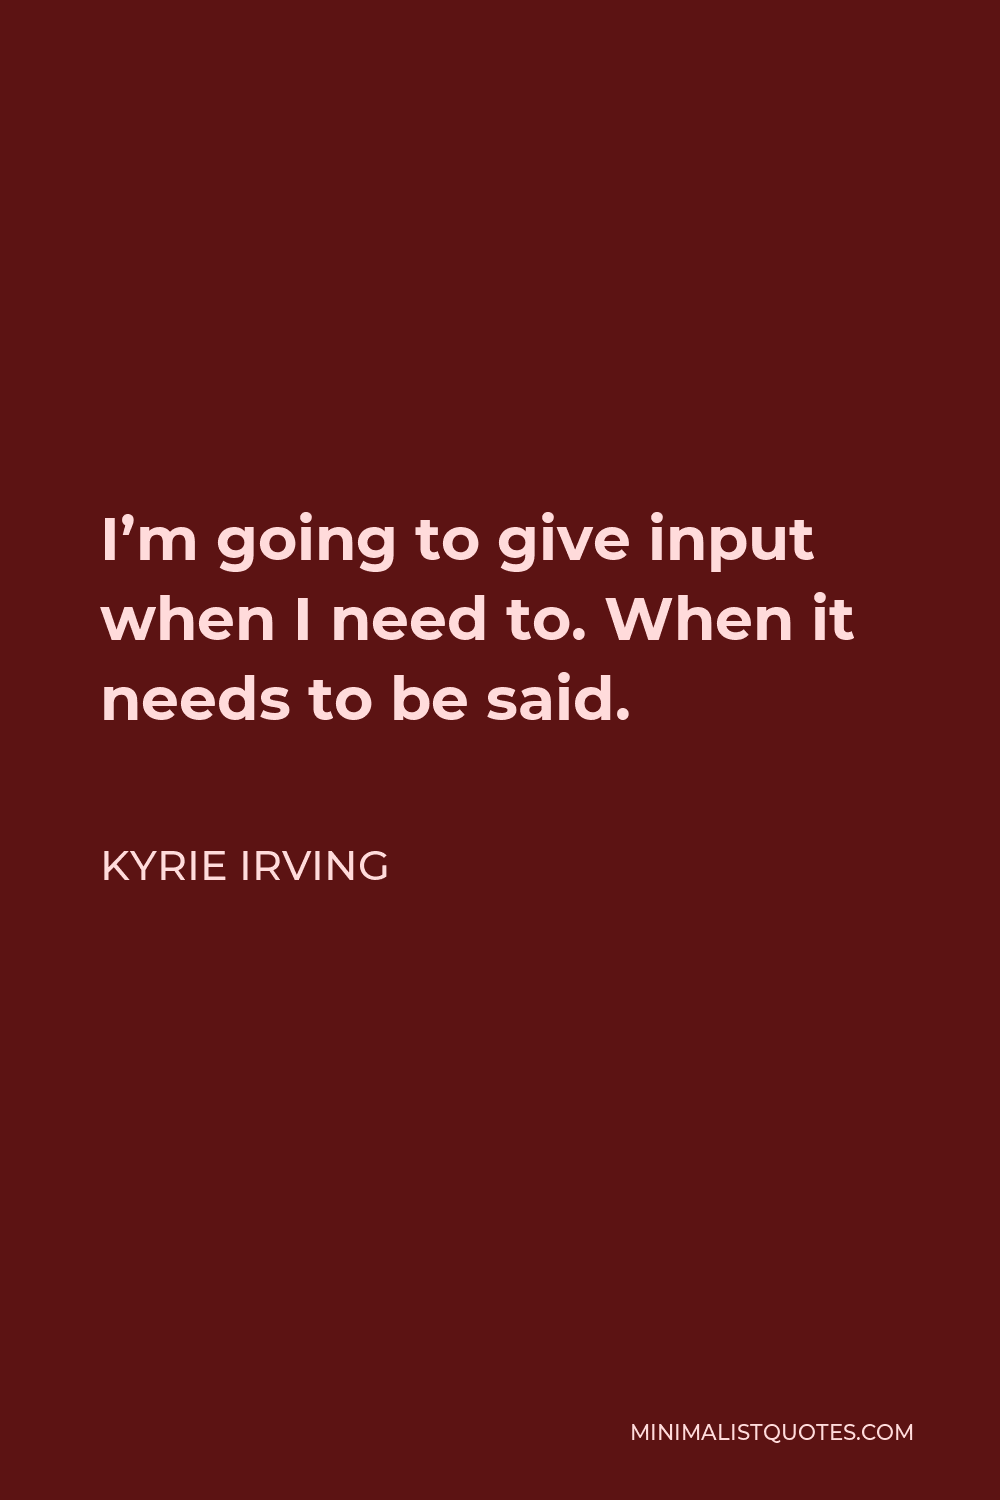 Kyrie Irving Quote - I’m going to give input when I need to. When it needs to be said.